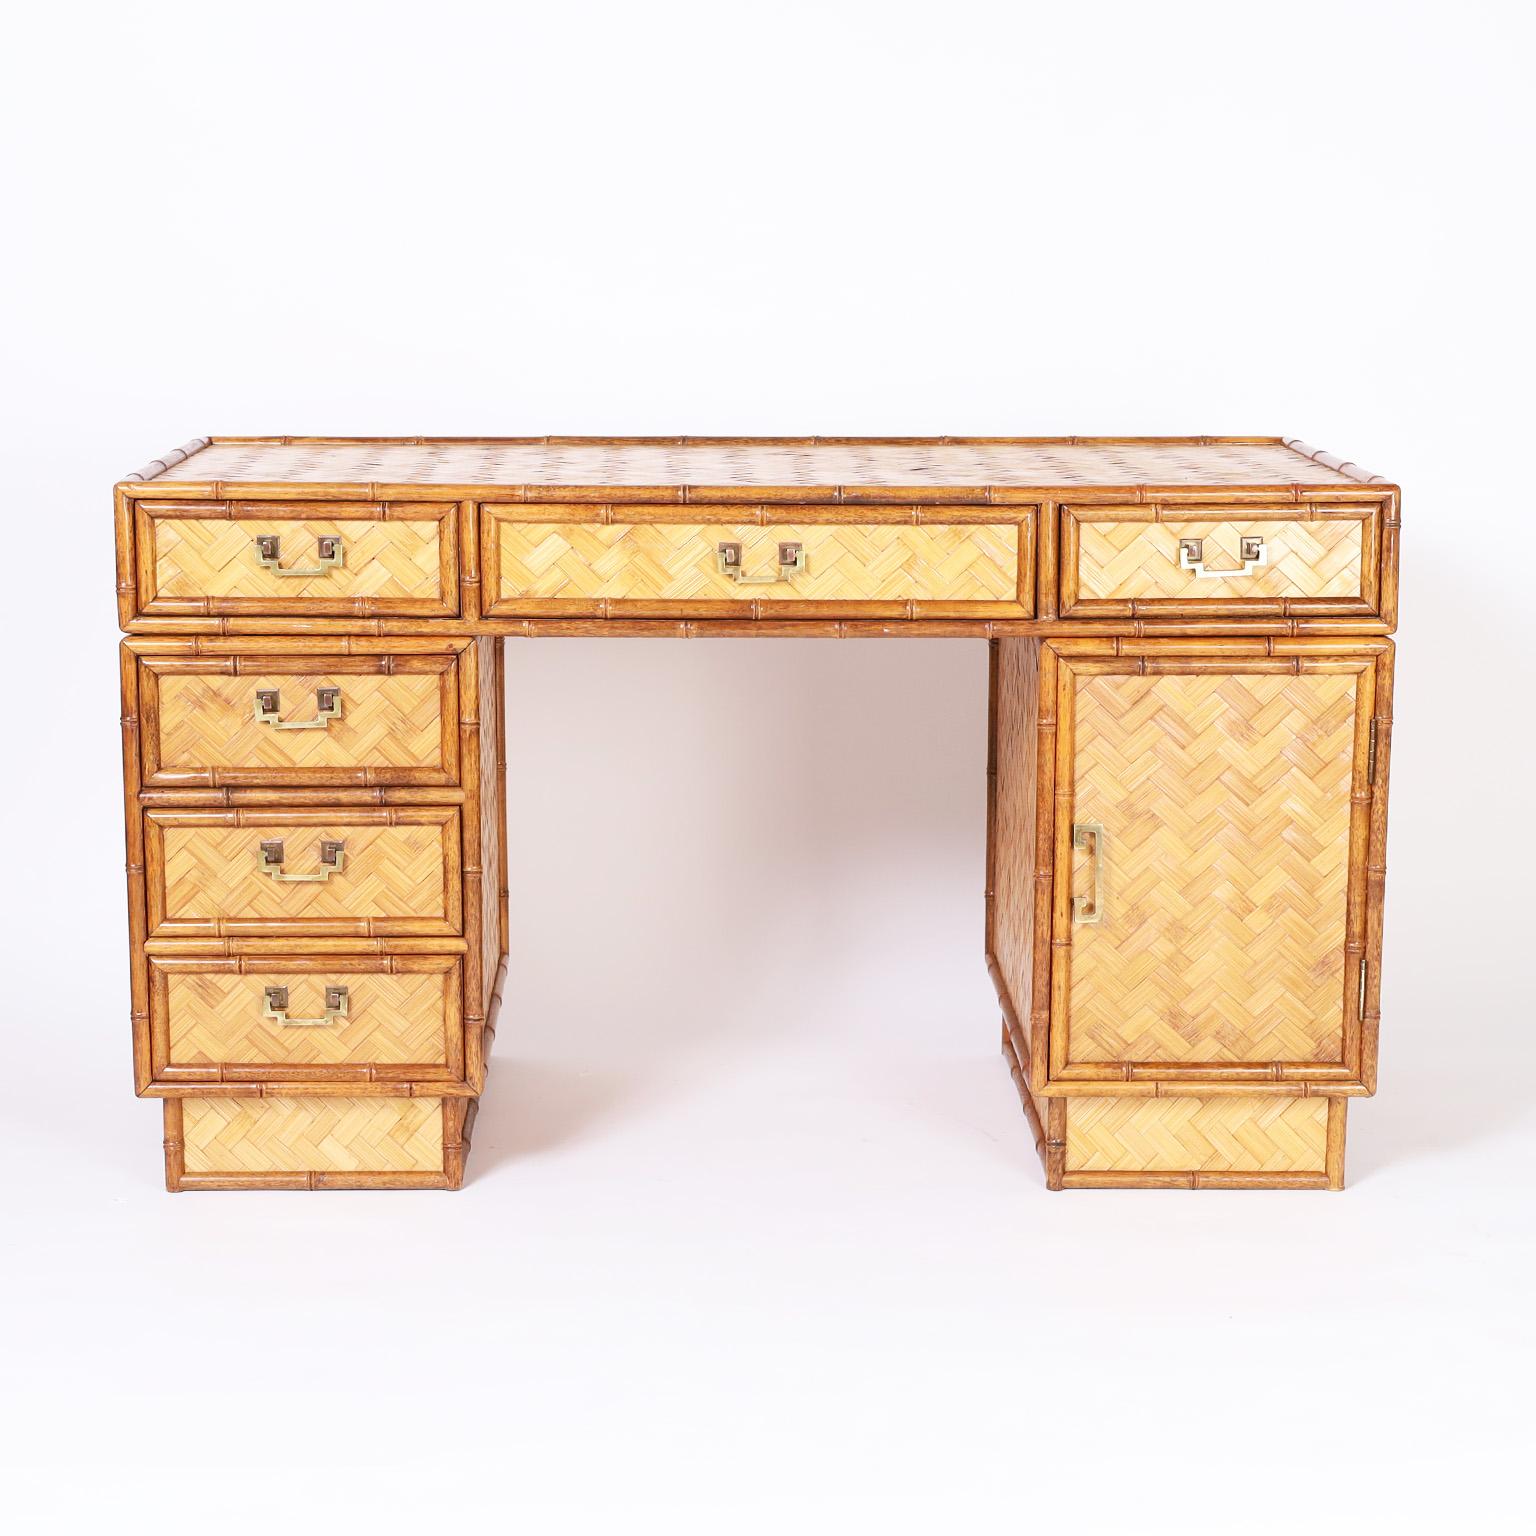 In vogue Asian modern desk with six drawers and a cabinet, faux bamboo frame, herringbone woven reed panels all around, Asian modern brass hardware and block feet.